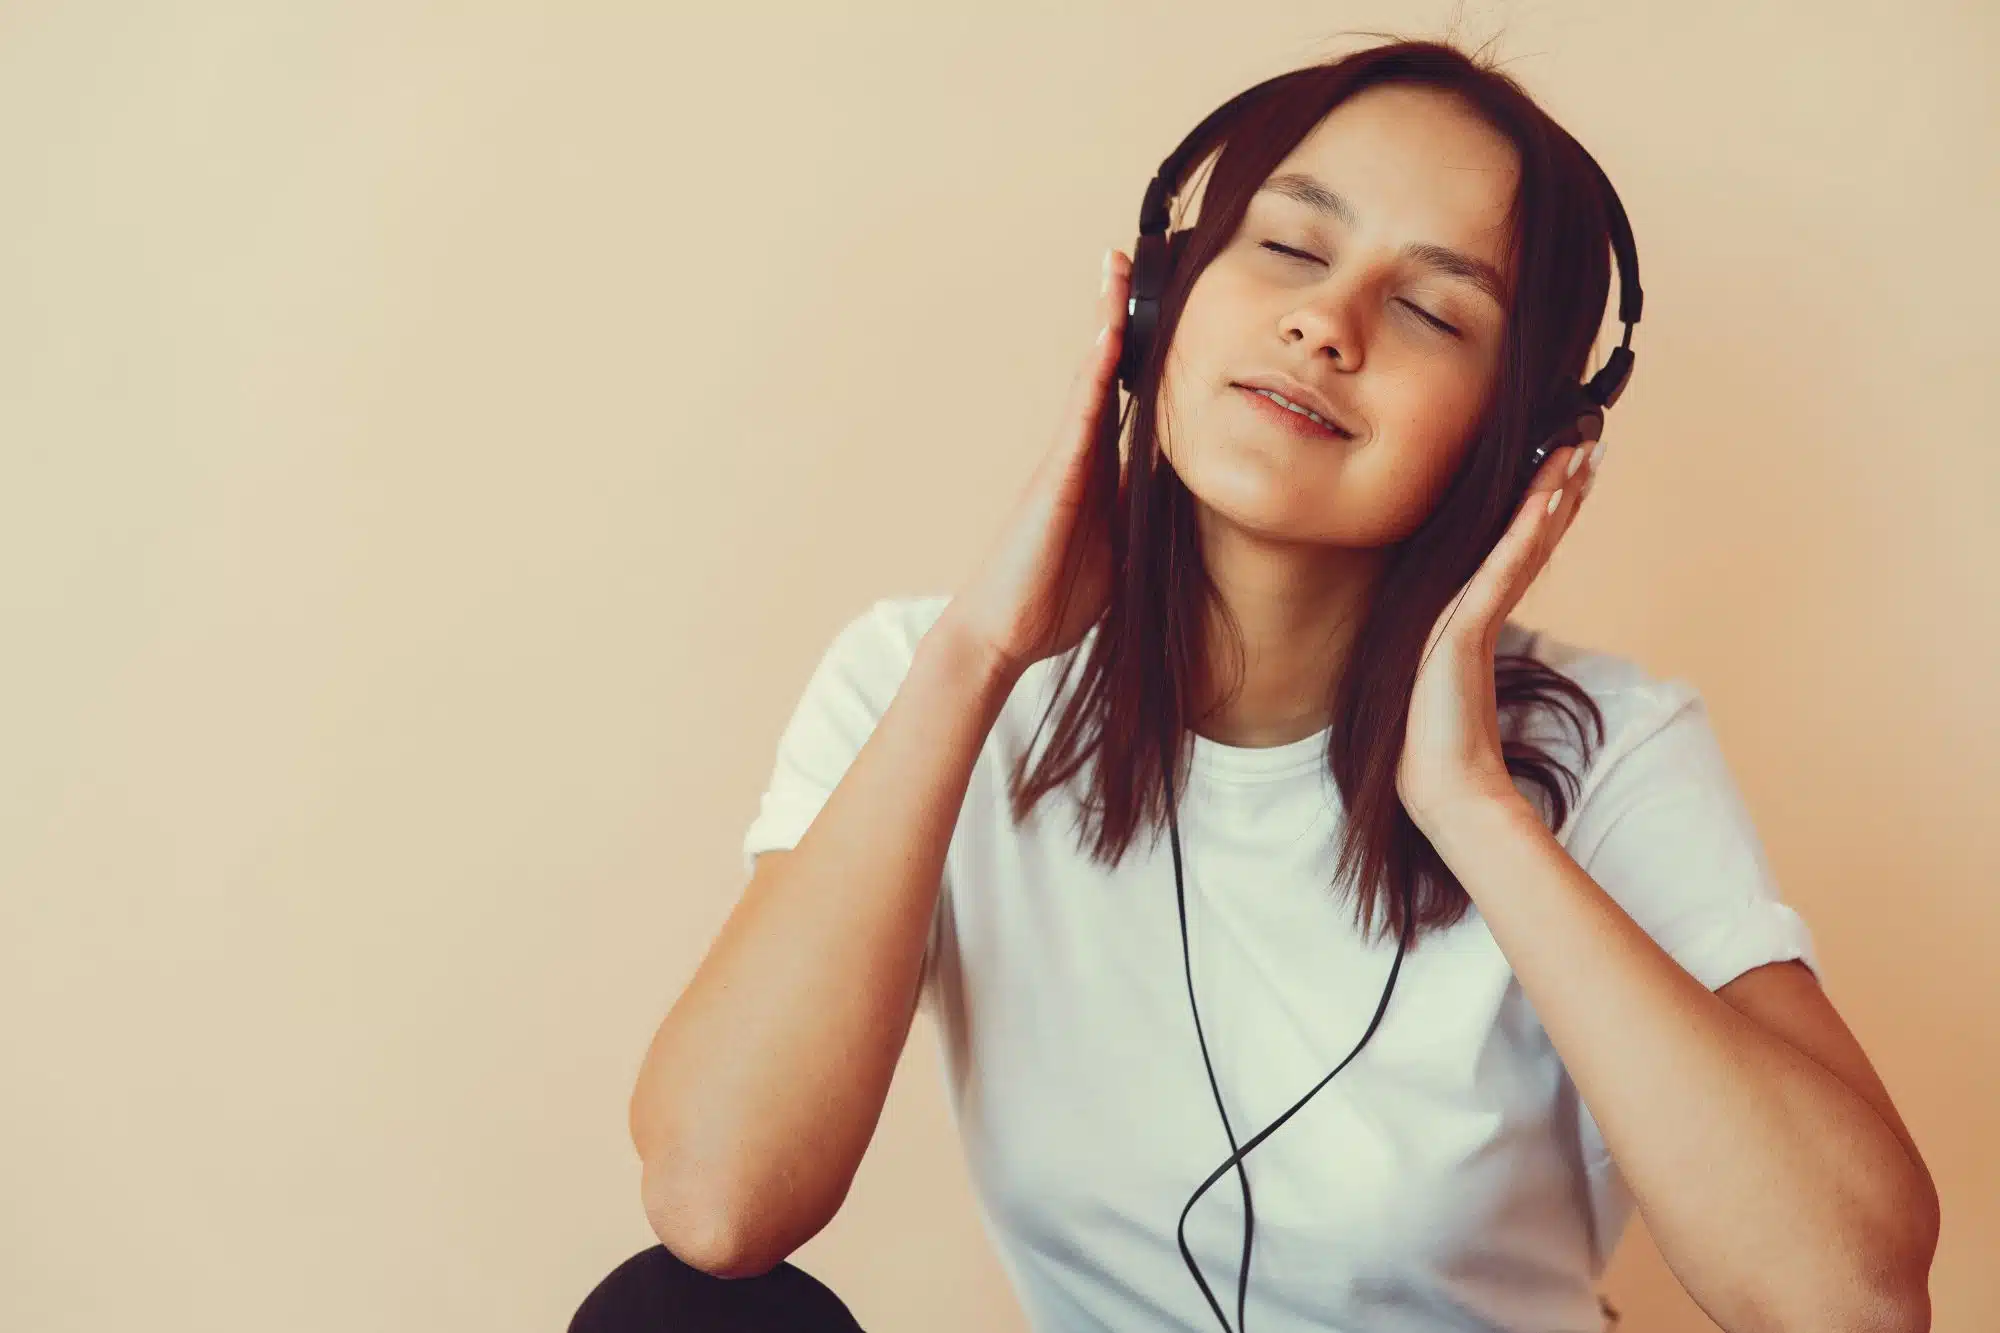 How Does Music Therapy Work?